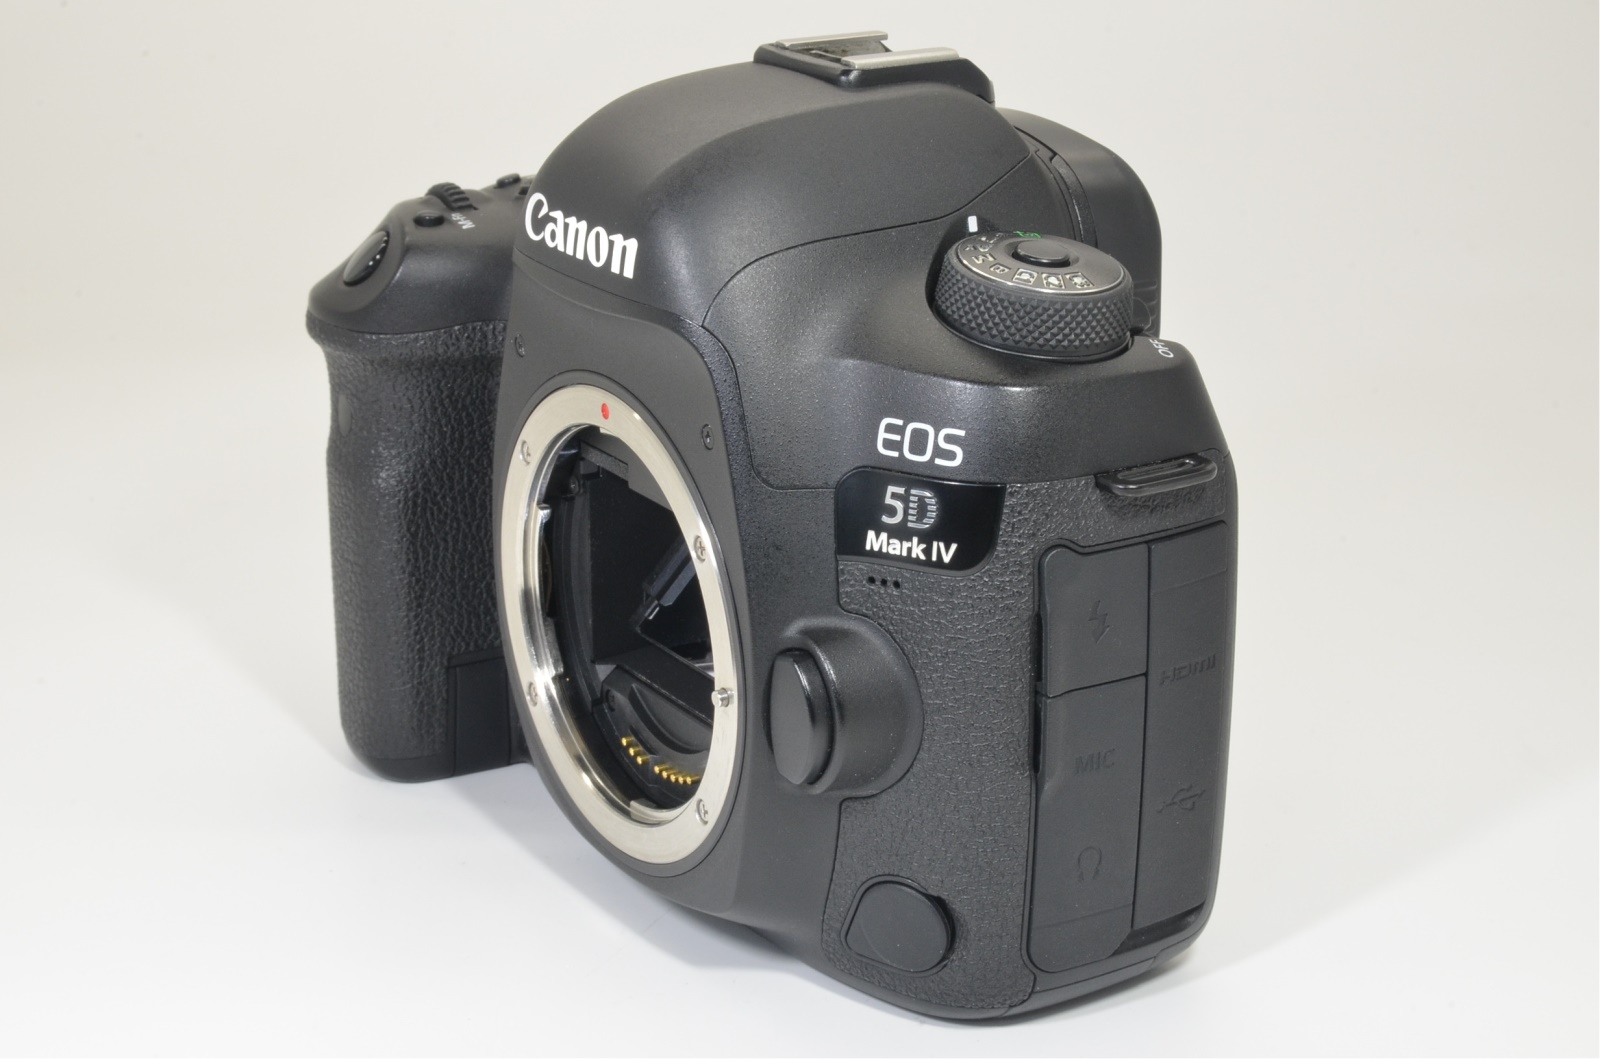 canon eos 5d mark 4 iv 30.4mp digital slr camera from japan shooting tested